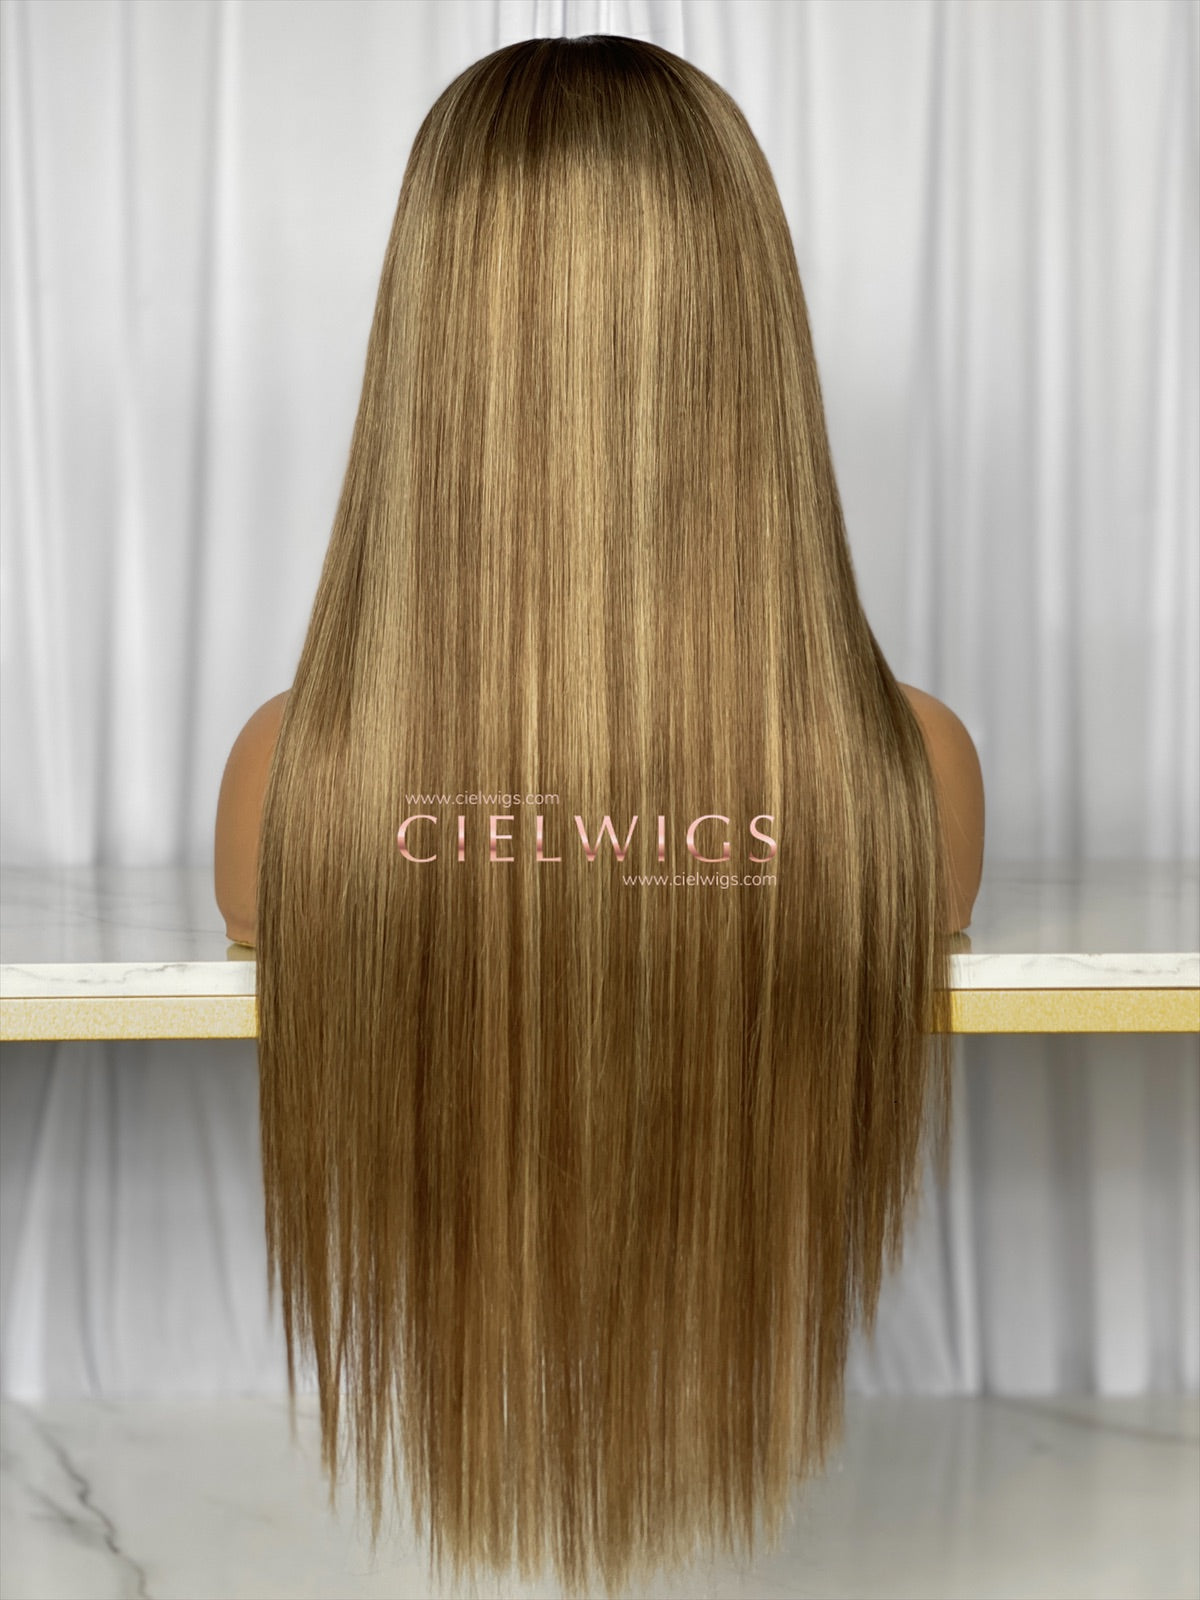 Blonde Highlight HD Lace Frontal Wig 